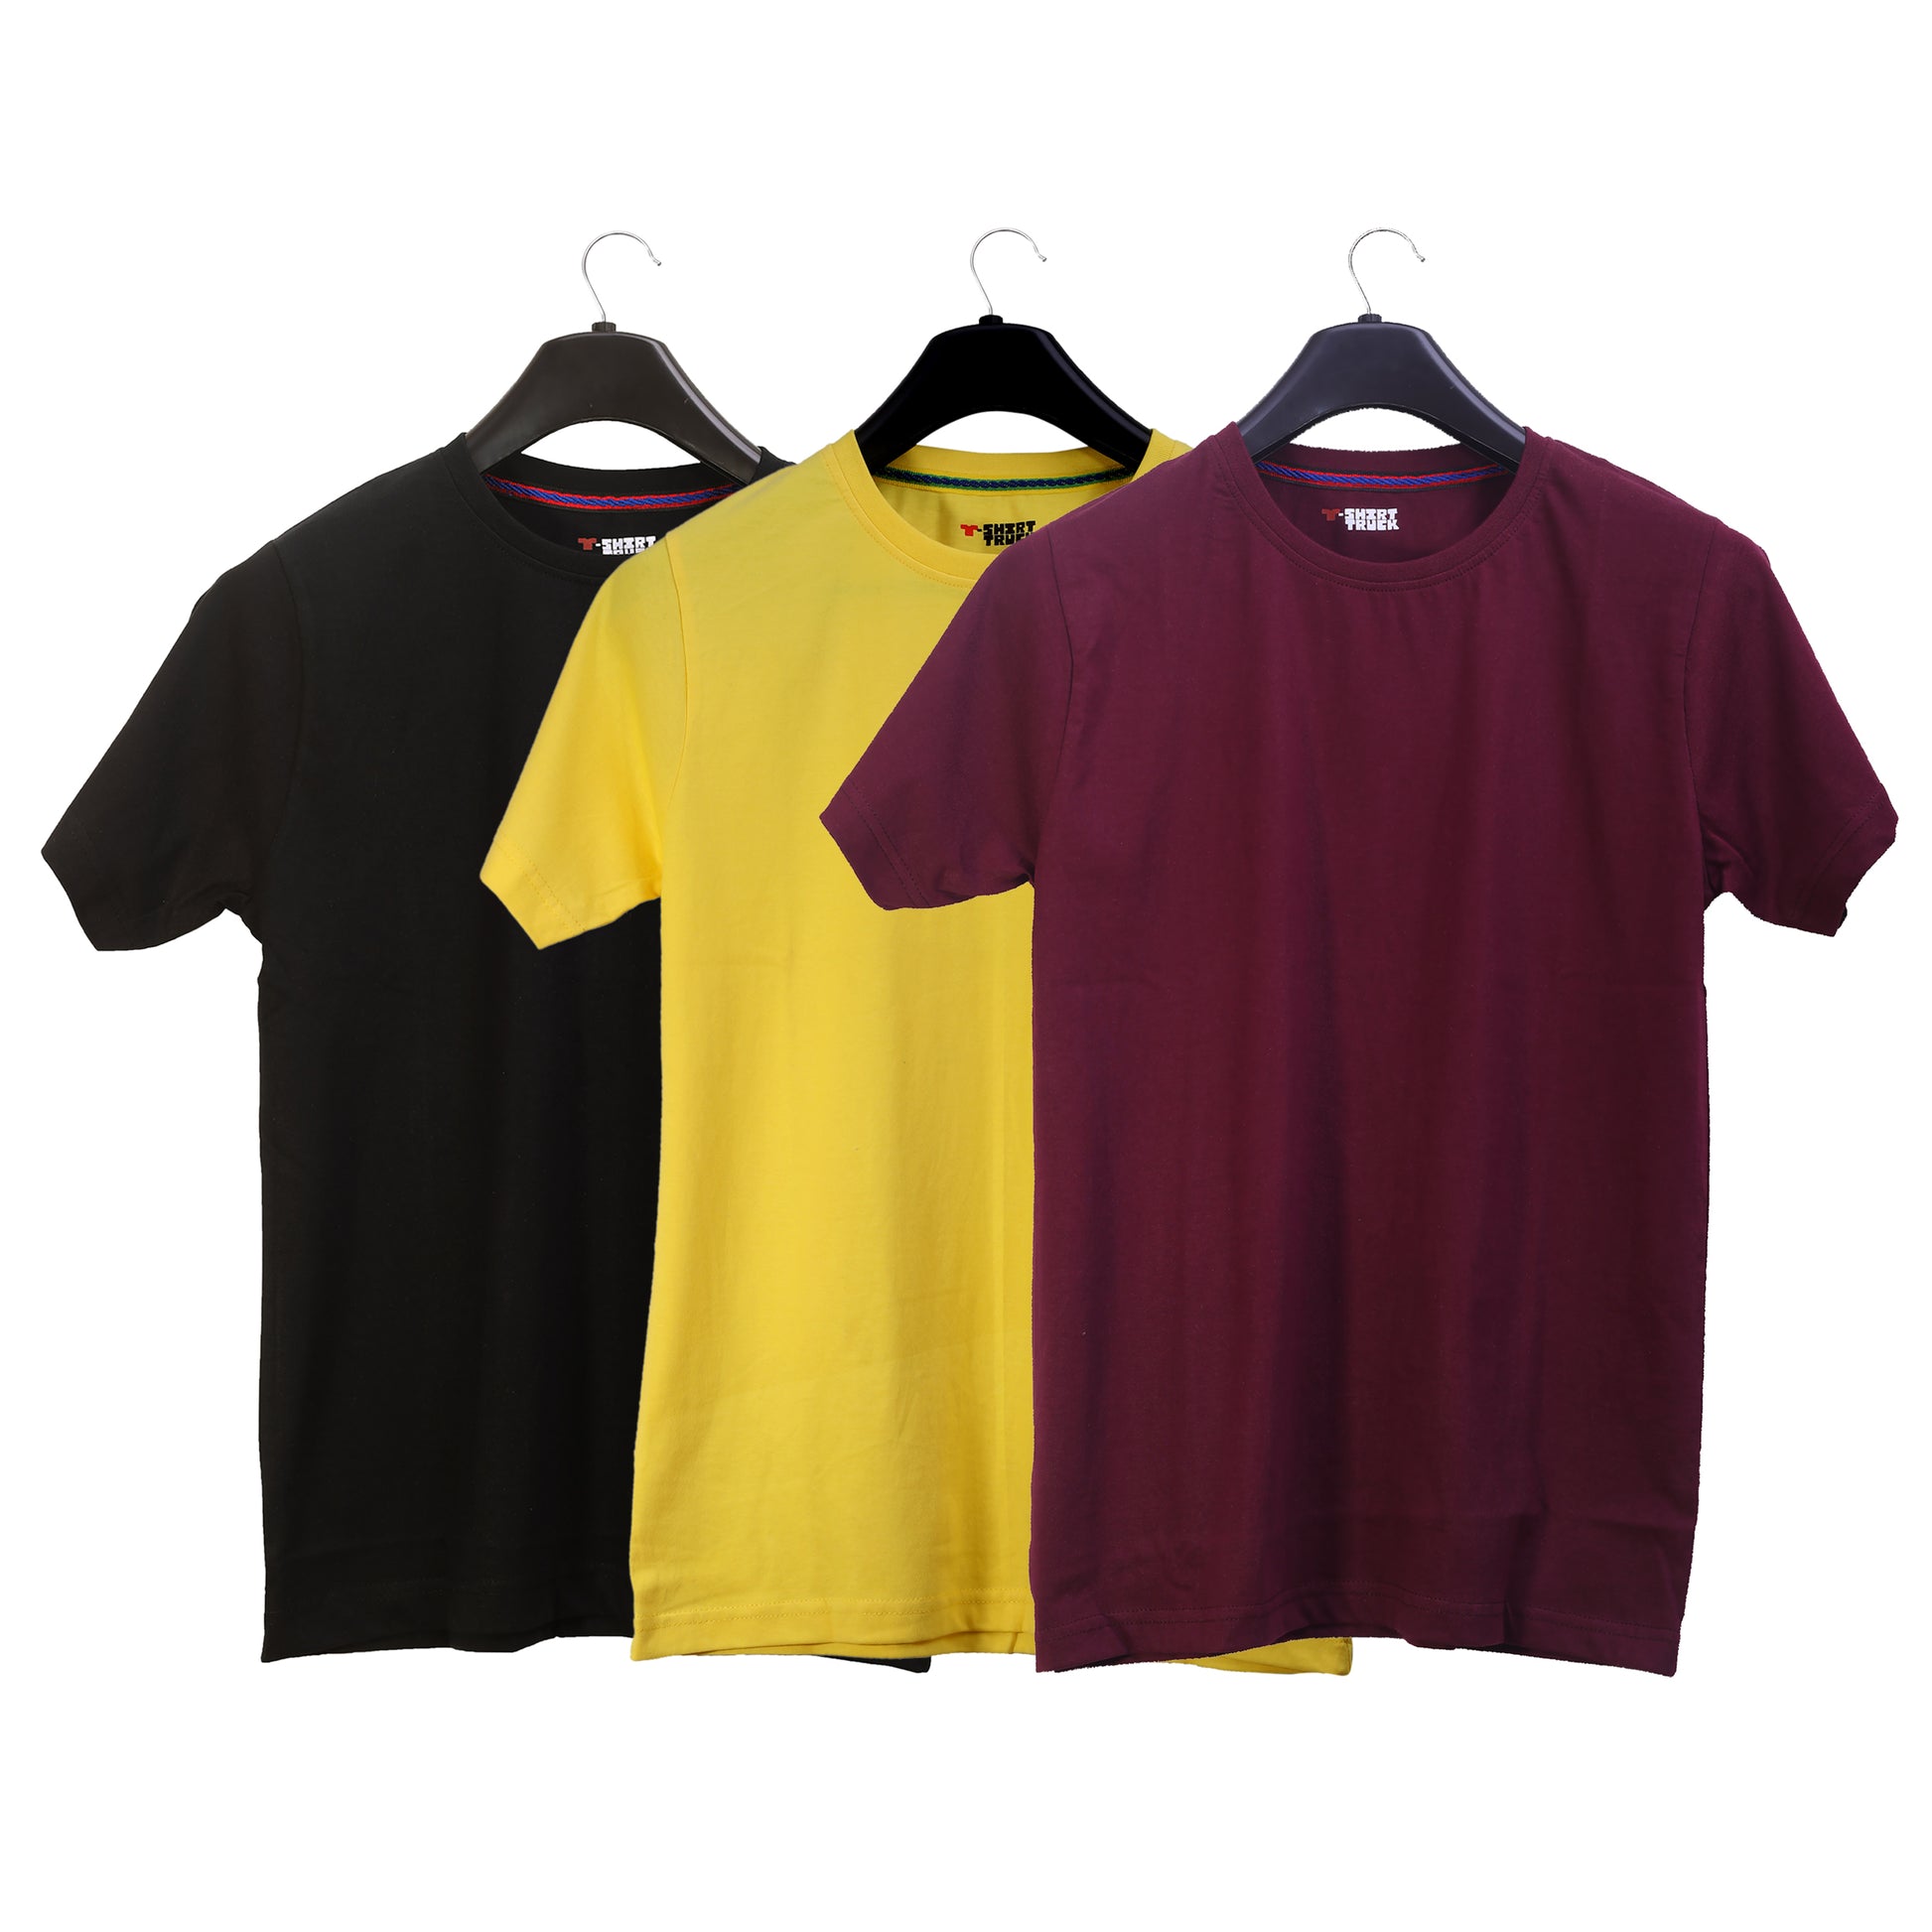 Unisex Round Neck Plain Solid Combo Pack of 3 T-shirts Black, Yellow & Maroon